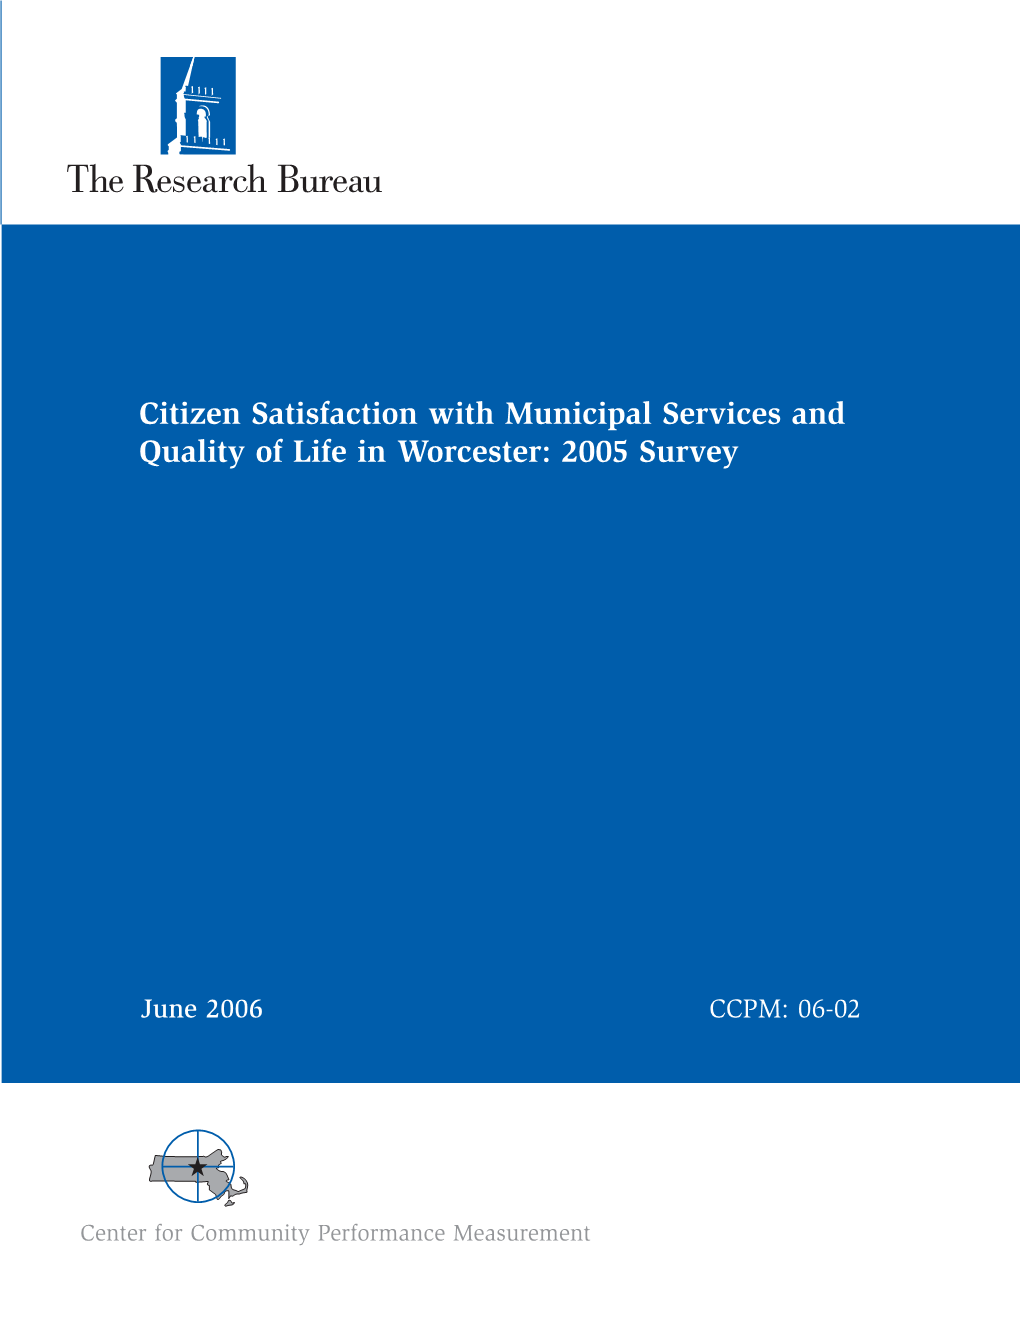 Citizen Satisfaction with Municipal Services and Quality of Life in Worcester: 2005 Survey